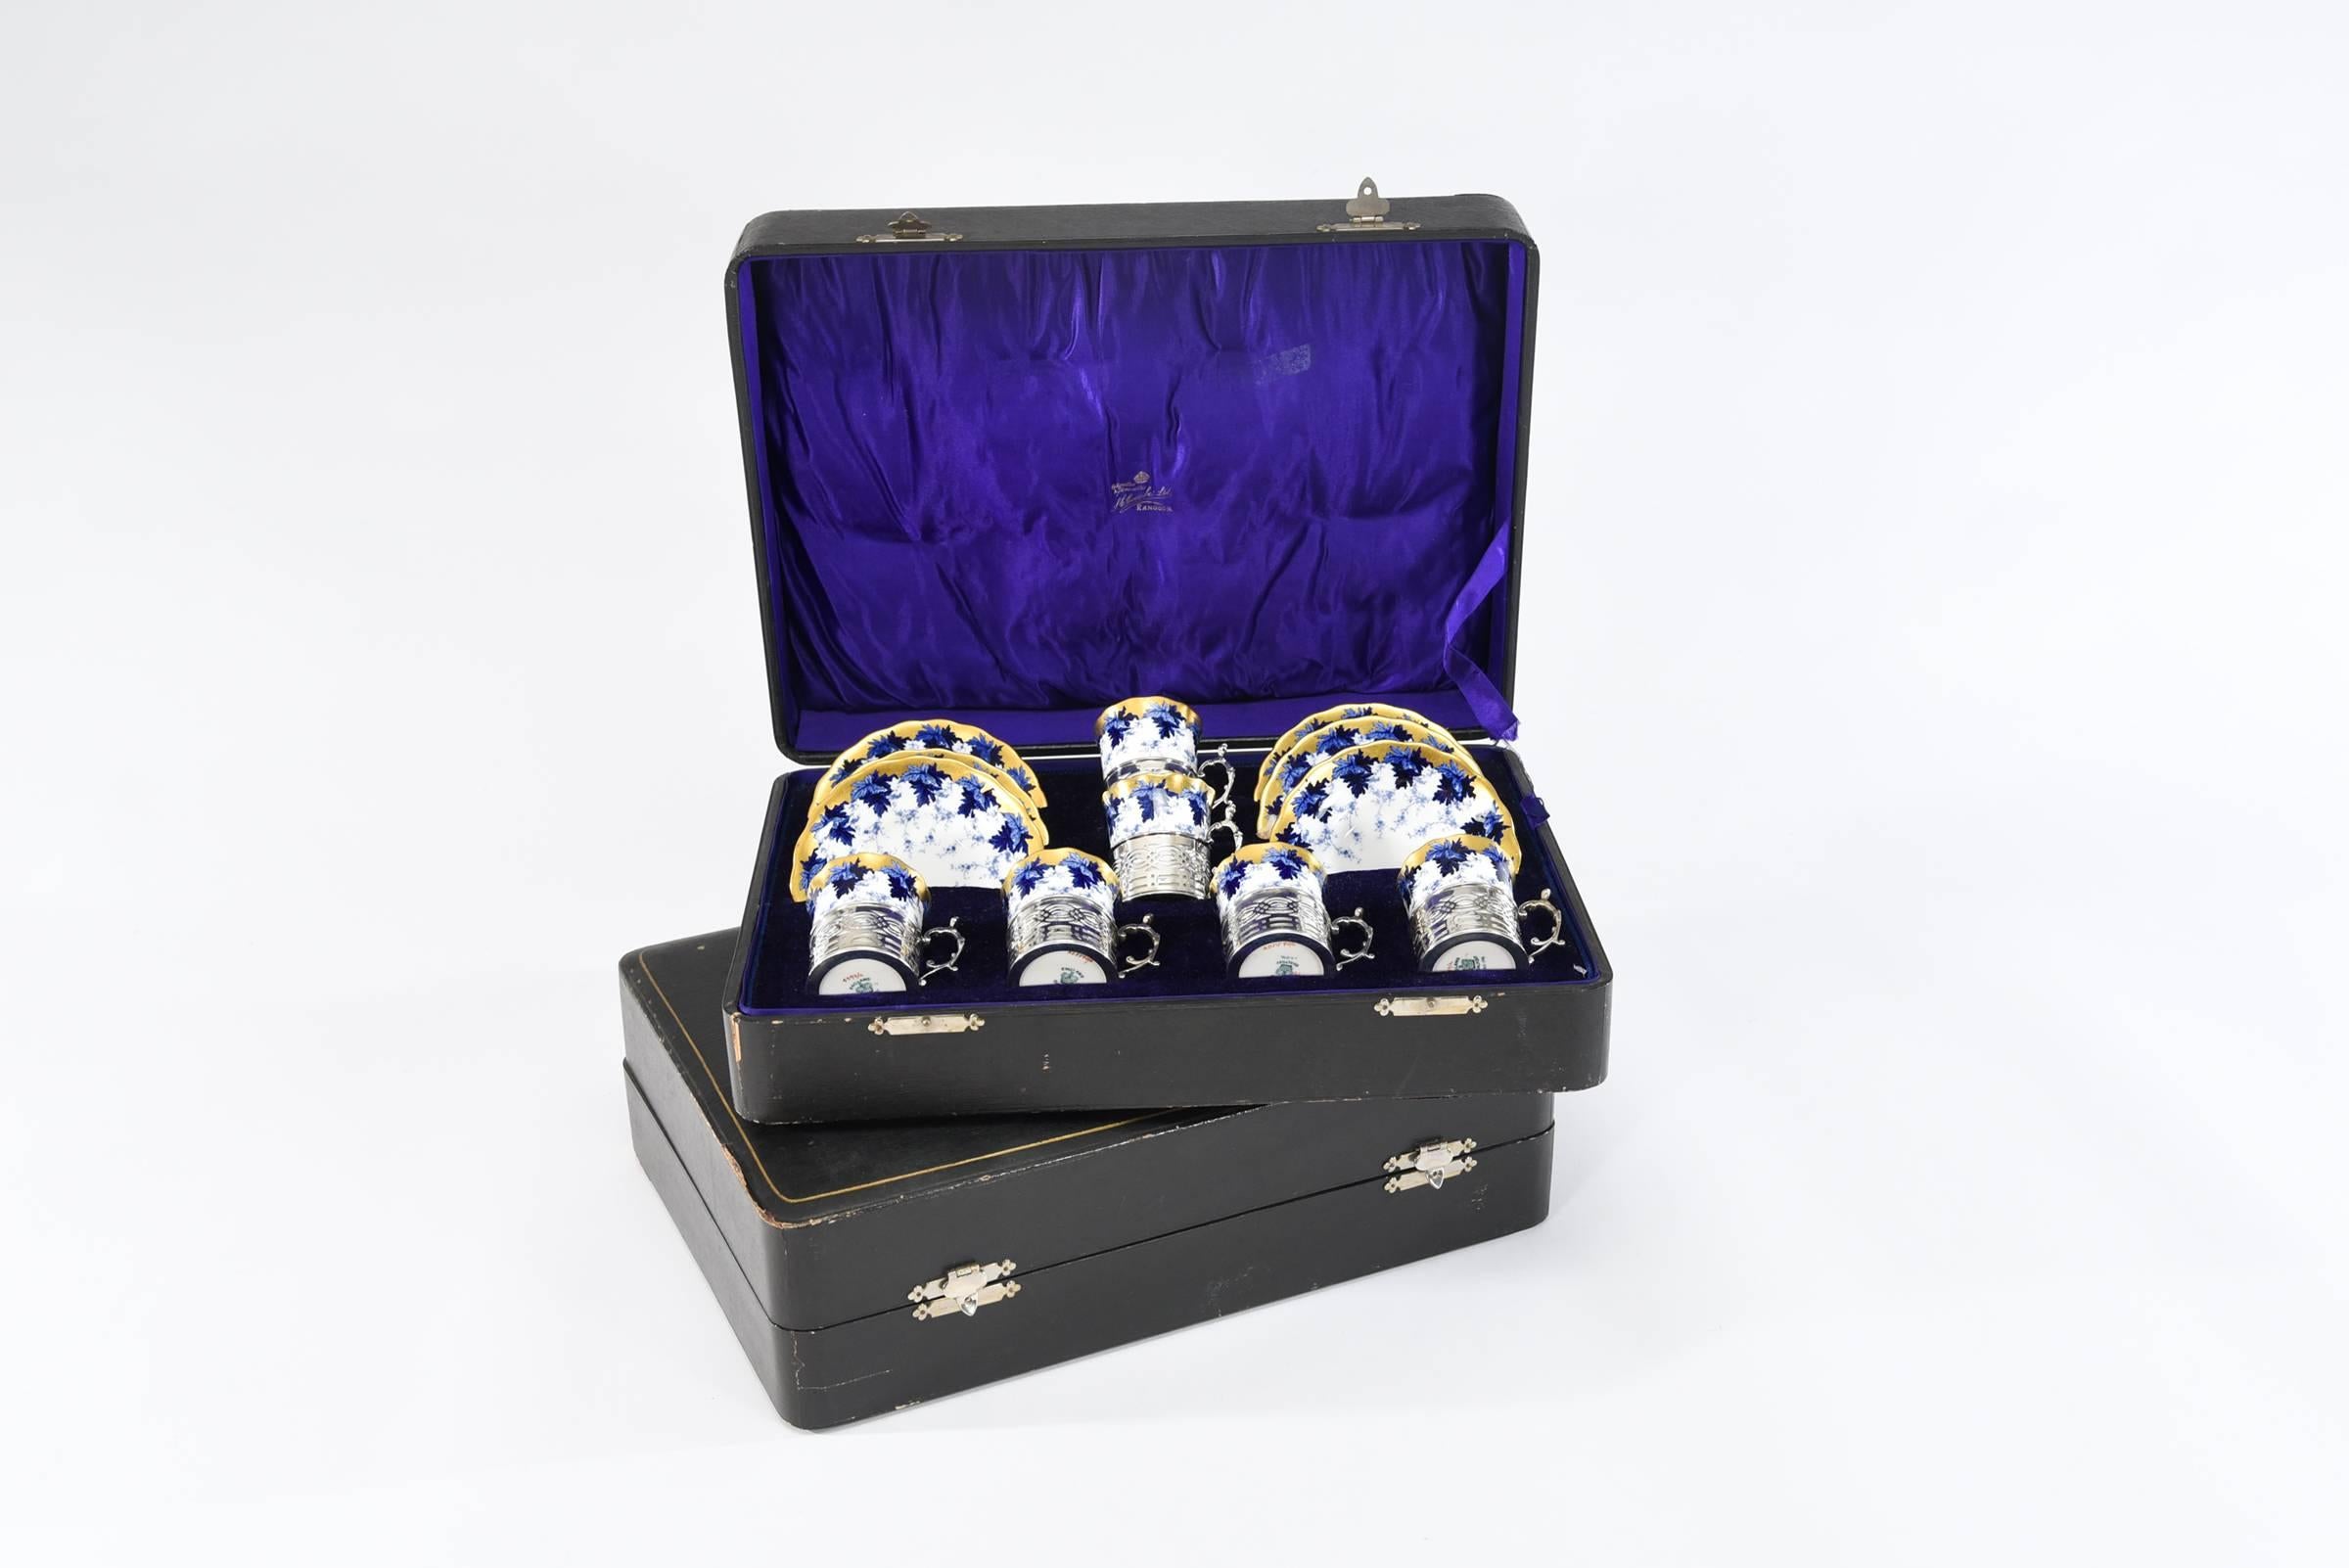 Set of 12 Coalport Cups & Saucers W/ Cobalt, Gold, Sterling Silver Fittings 3